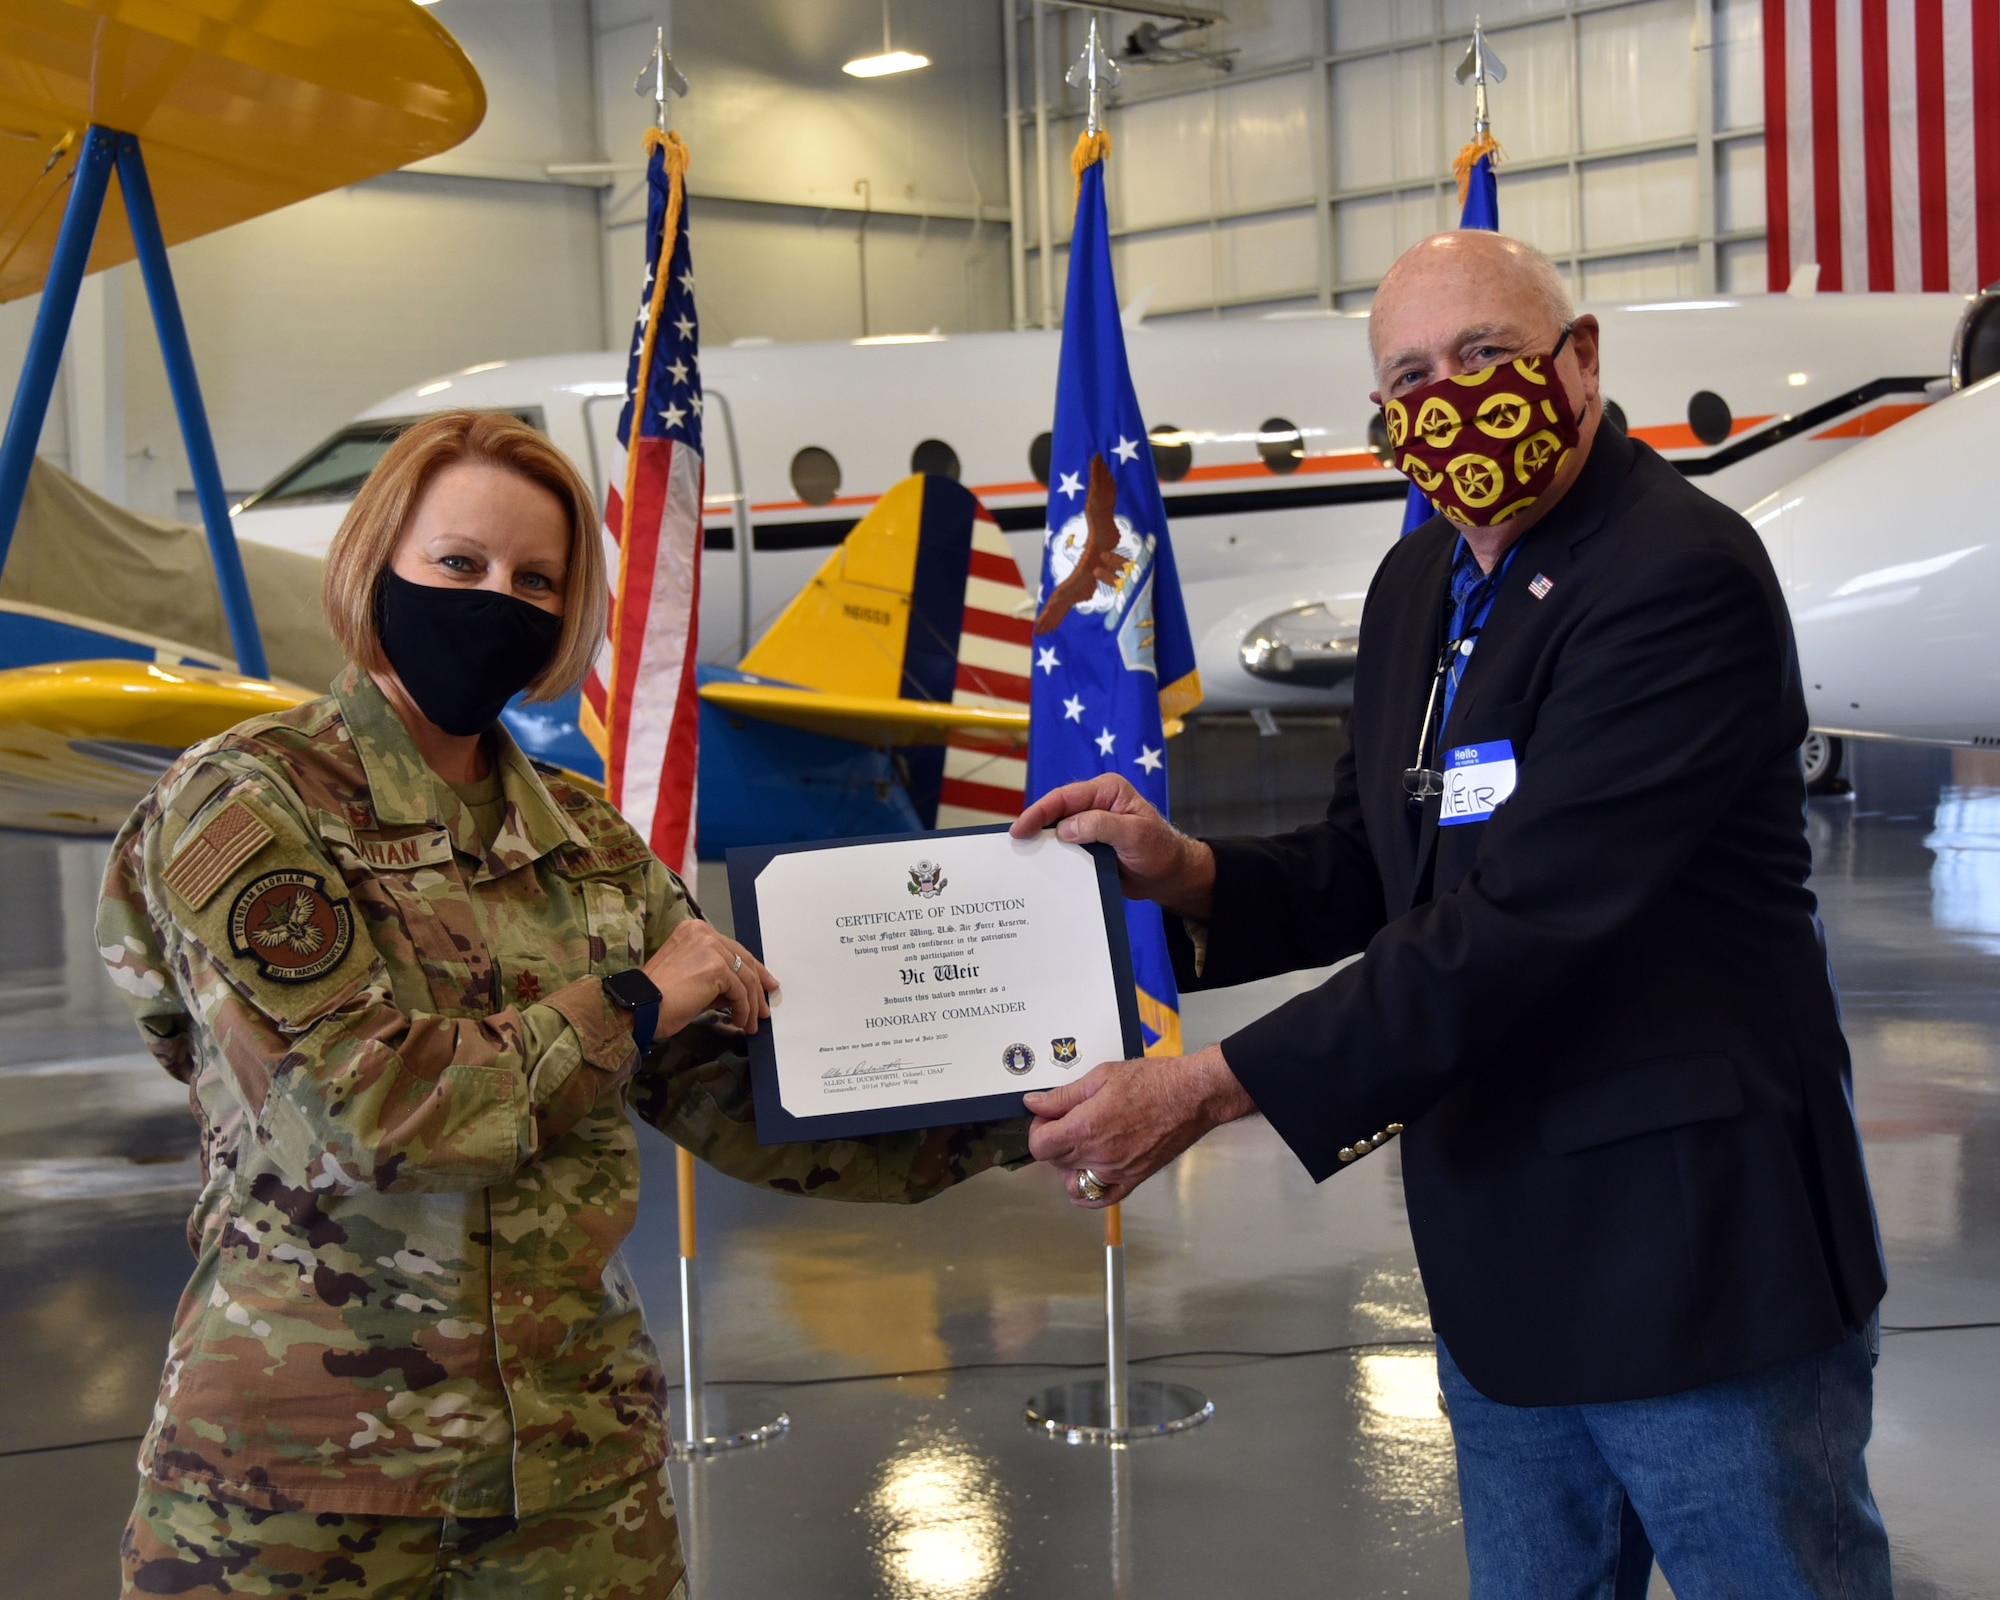 301st Fighter Wing Maintenance Squadron Commander Maj. Jennifer Trahan presents her MXS Honorary Commander Mr. Vic Weir an official certificate at the 301 FW Honorary Commander Induction Ceremony at Alliance Airport on July 31, 2020. Weir is one of the 17 wing honorary commanders. (U.S. photo by Senior Airman Kedesha Pennant)